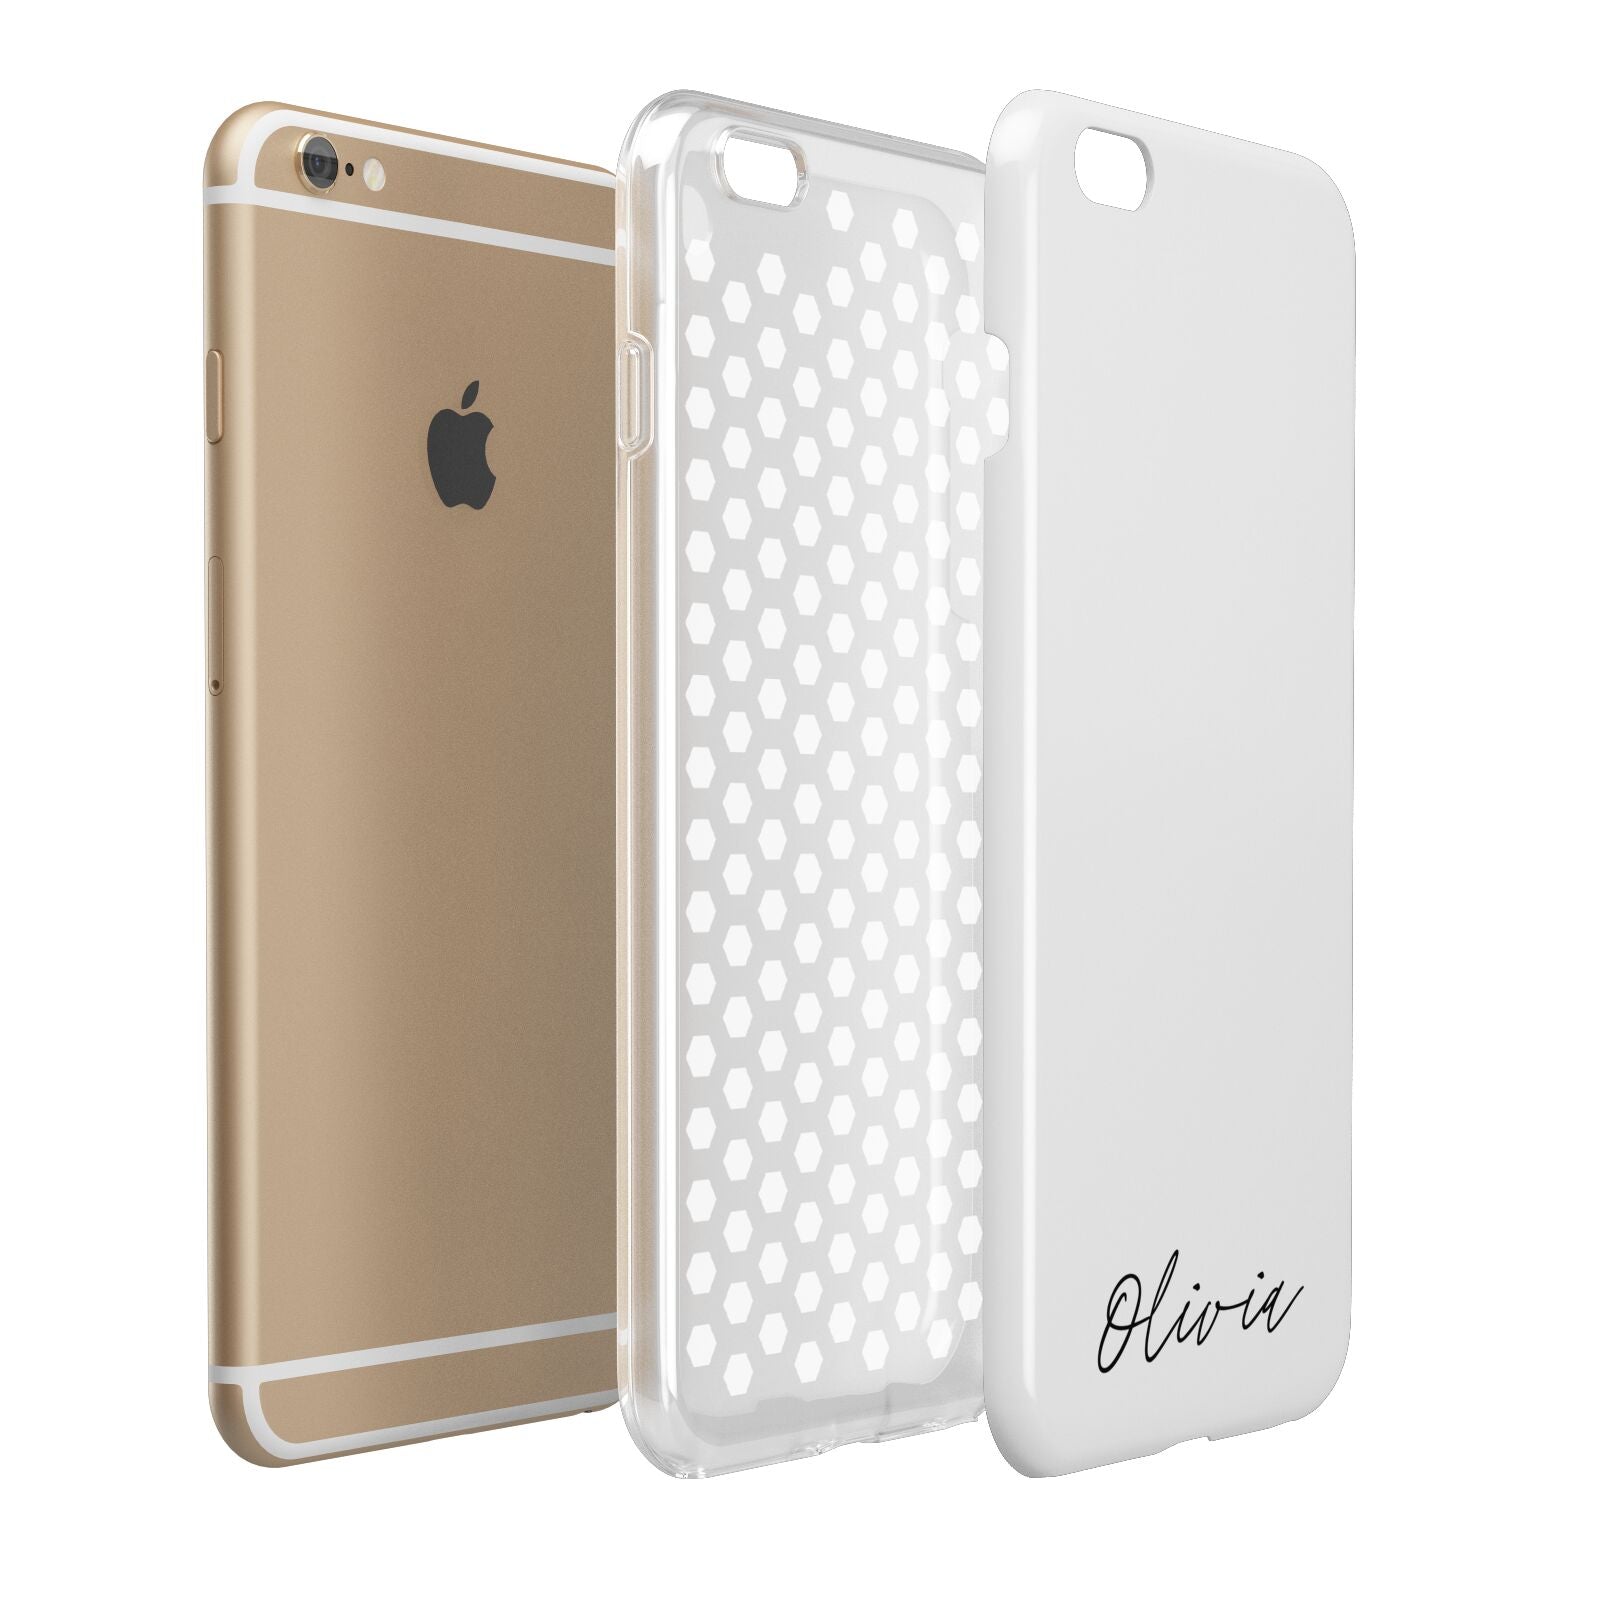 Scroll Text Name Apple iPhone 6 Plus 3D Tough Case Expand Detail Image